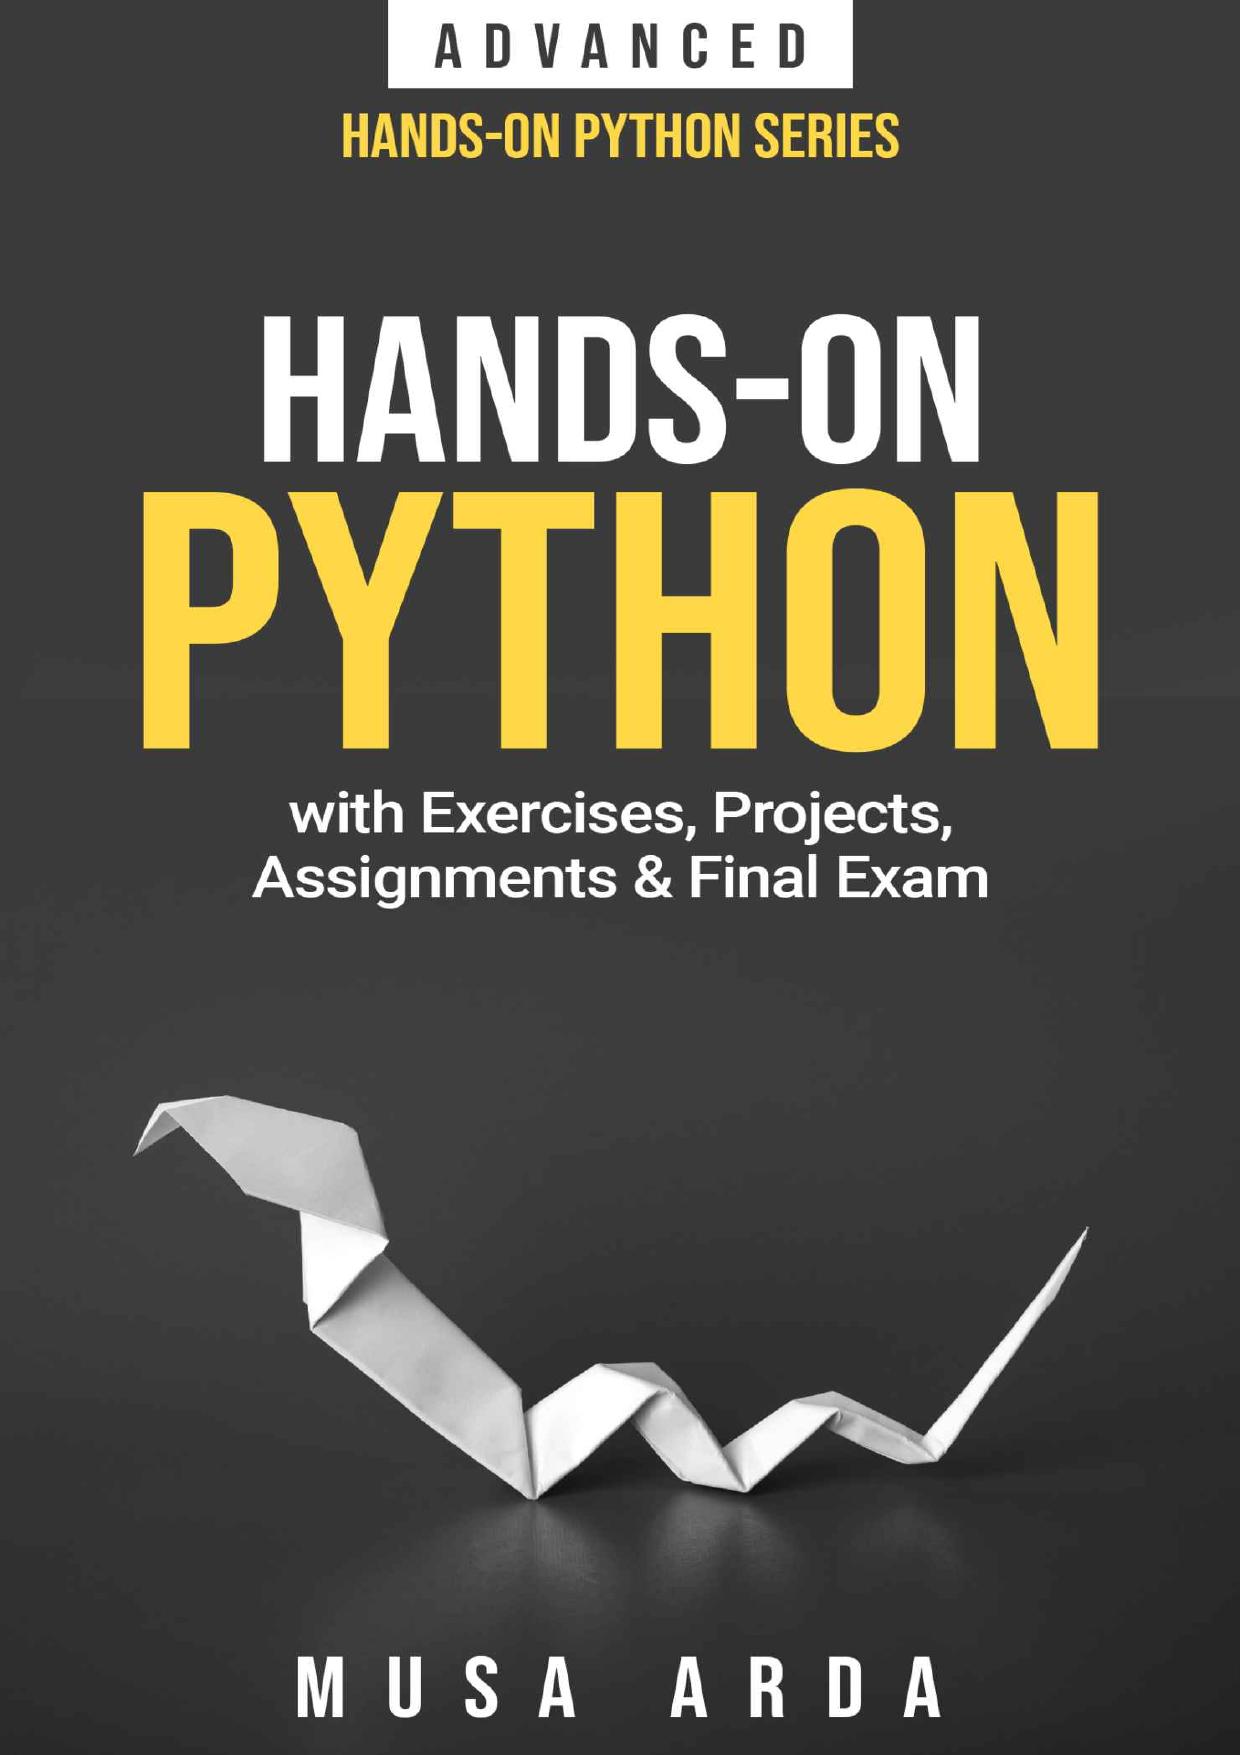 Hands-On Python with Exercises, Projects, Assignments & Final Exam